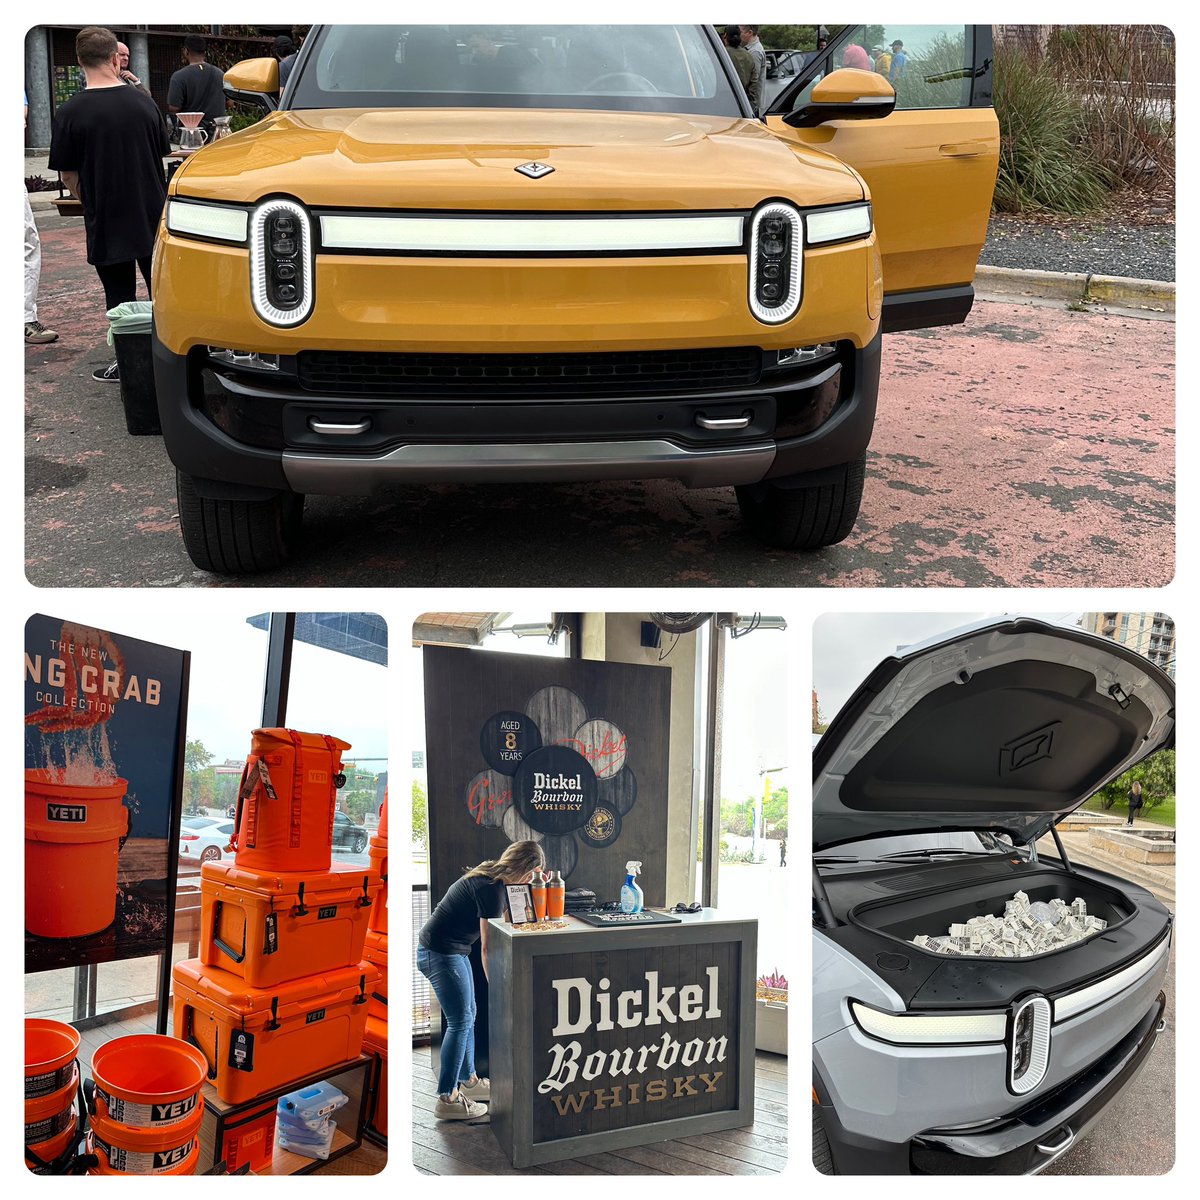 What a #PopUp! @Yeti , @Rivian and George Dickel- all three combined at SXSW . There were so many collabs and creative ideas scattered about the citywide festival. This one was right across the street from our hotel.